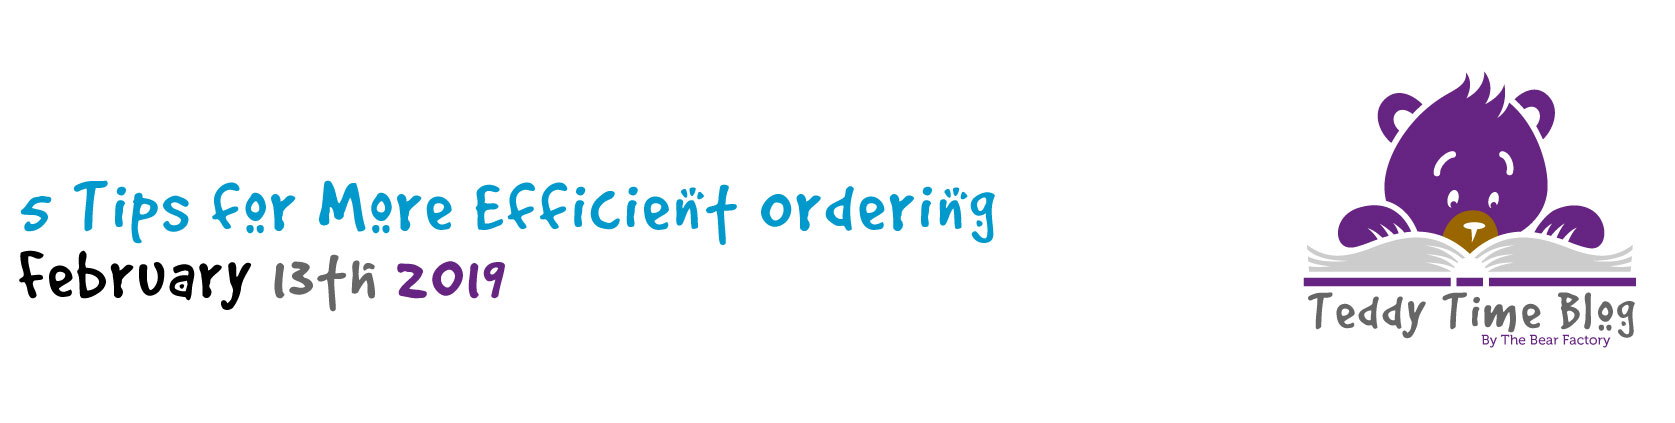 5 tips for more efficient ordering